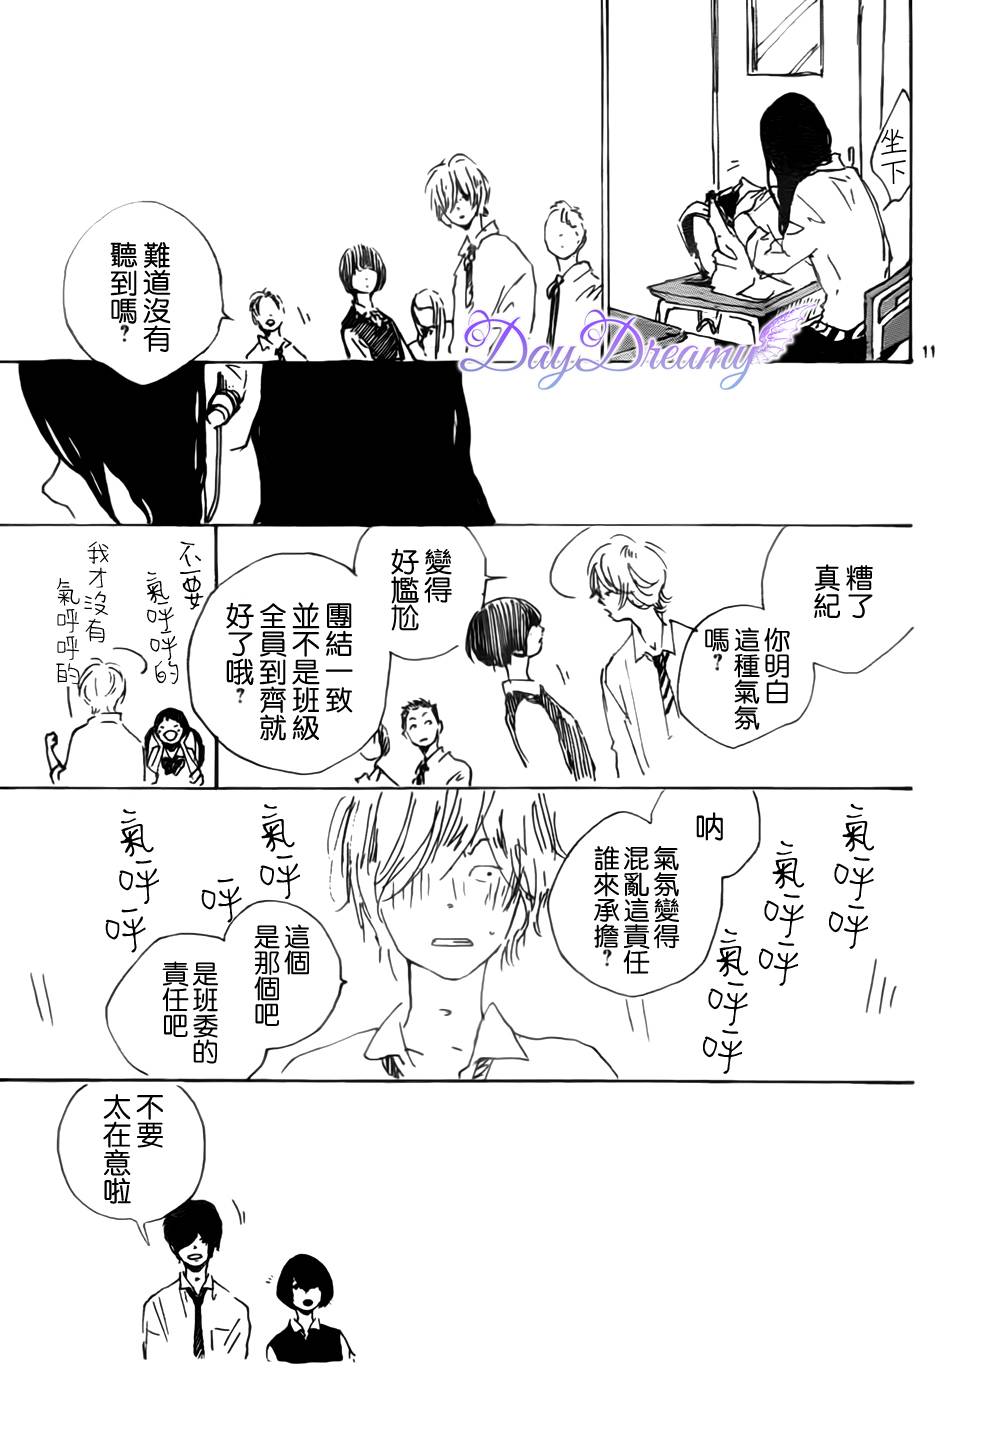 《Stand Up!》漫画 Stand Up 012集